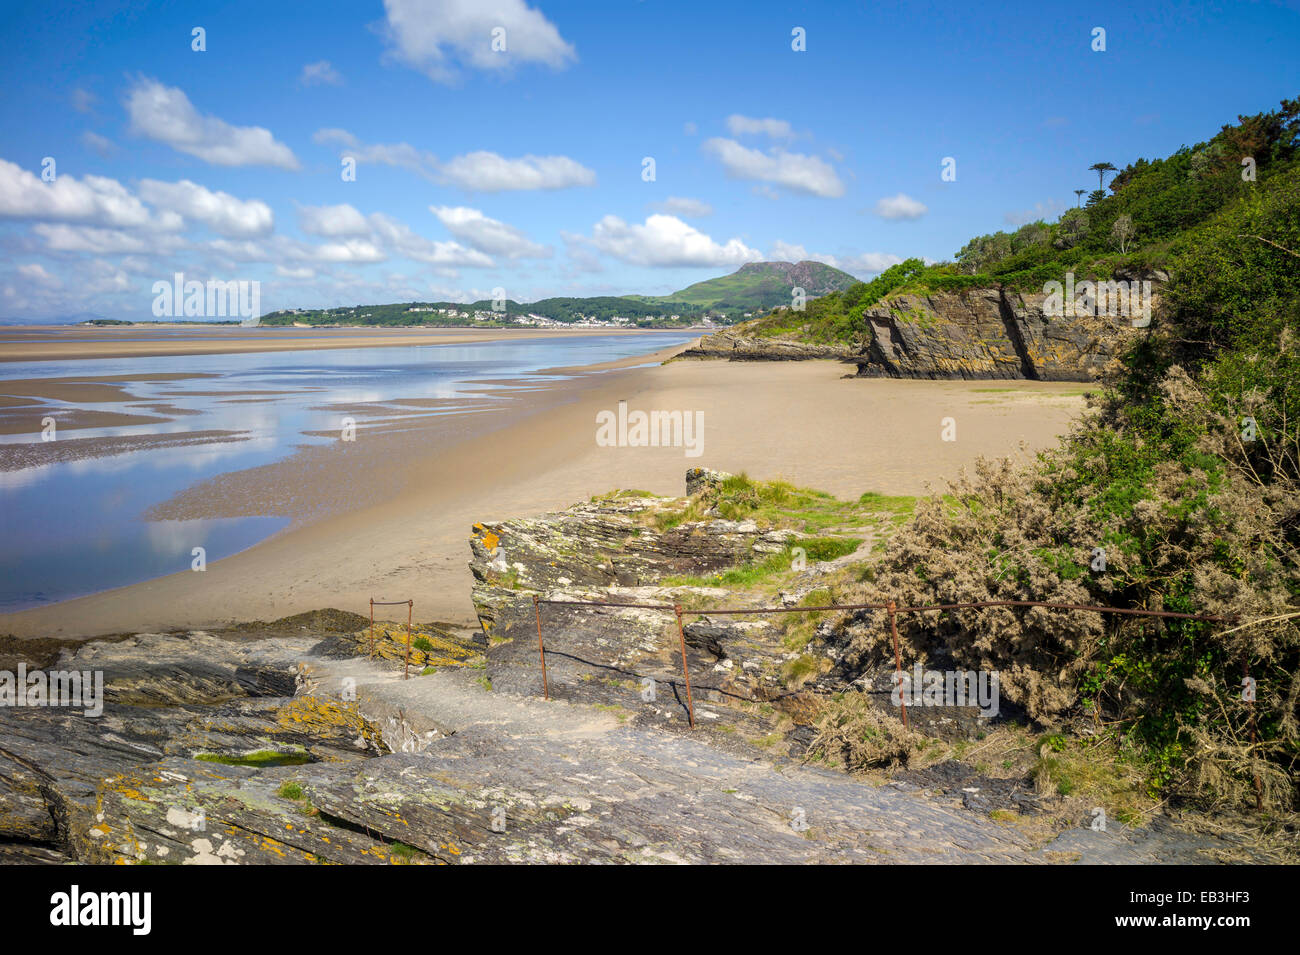 A quiet small sandy bay on the Portmeirion coastal walk on the river Dwyryd estuary. In the background is Borth-y-gest. Stock Photo